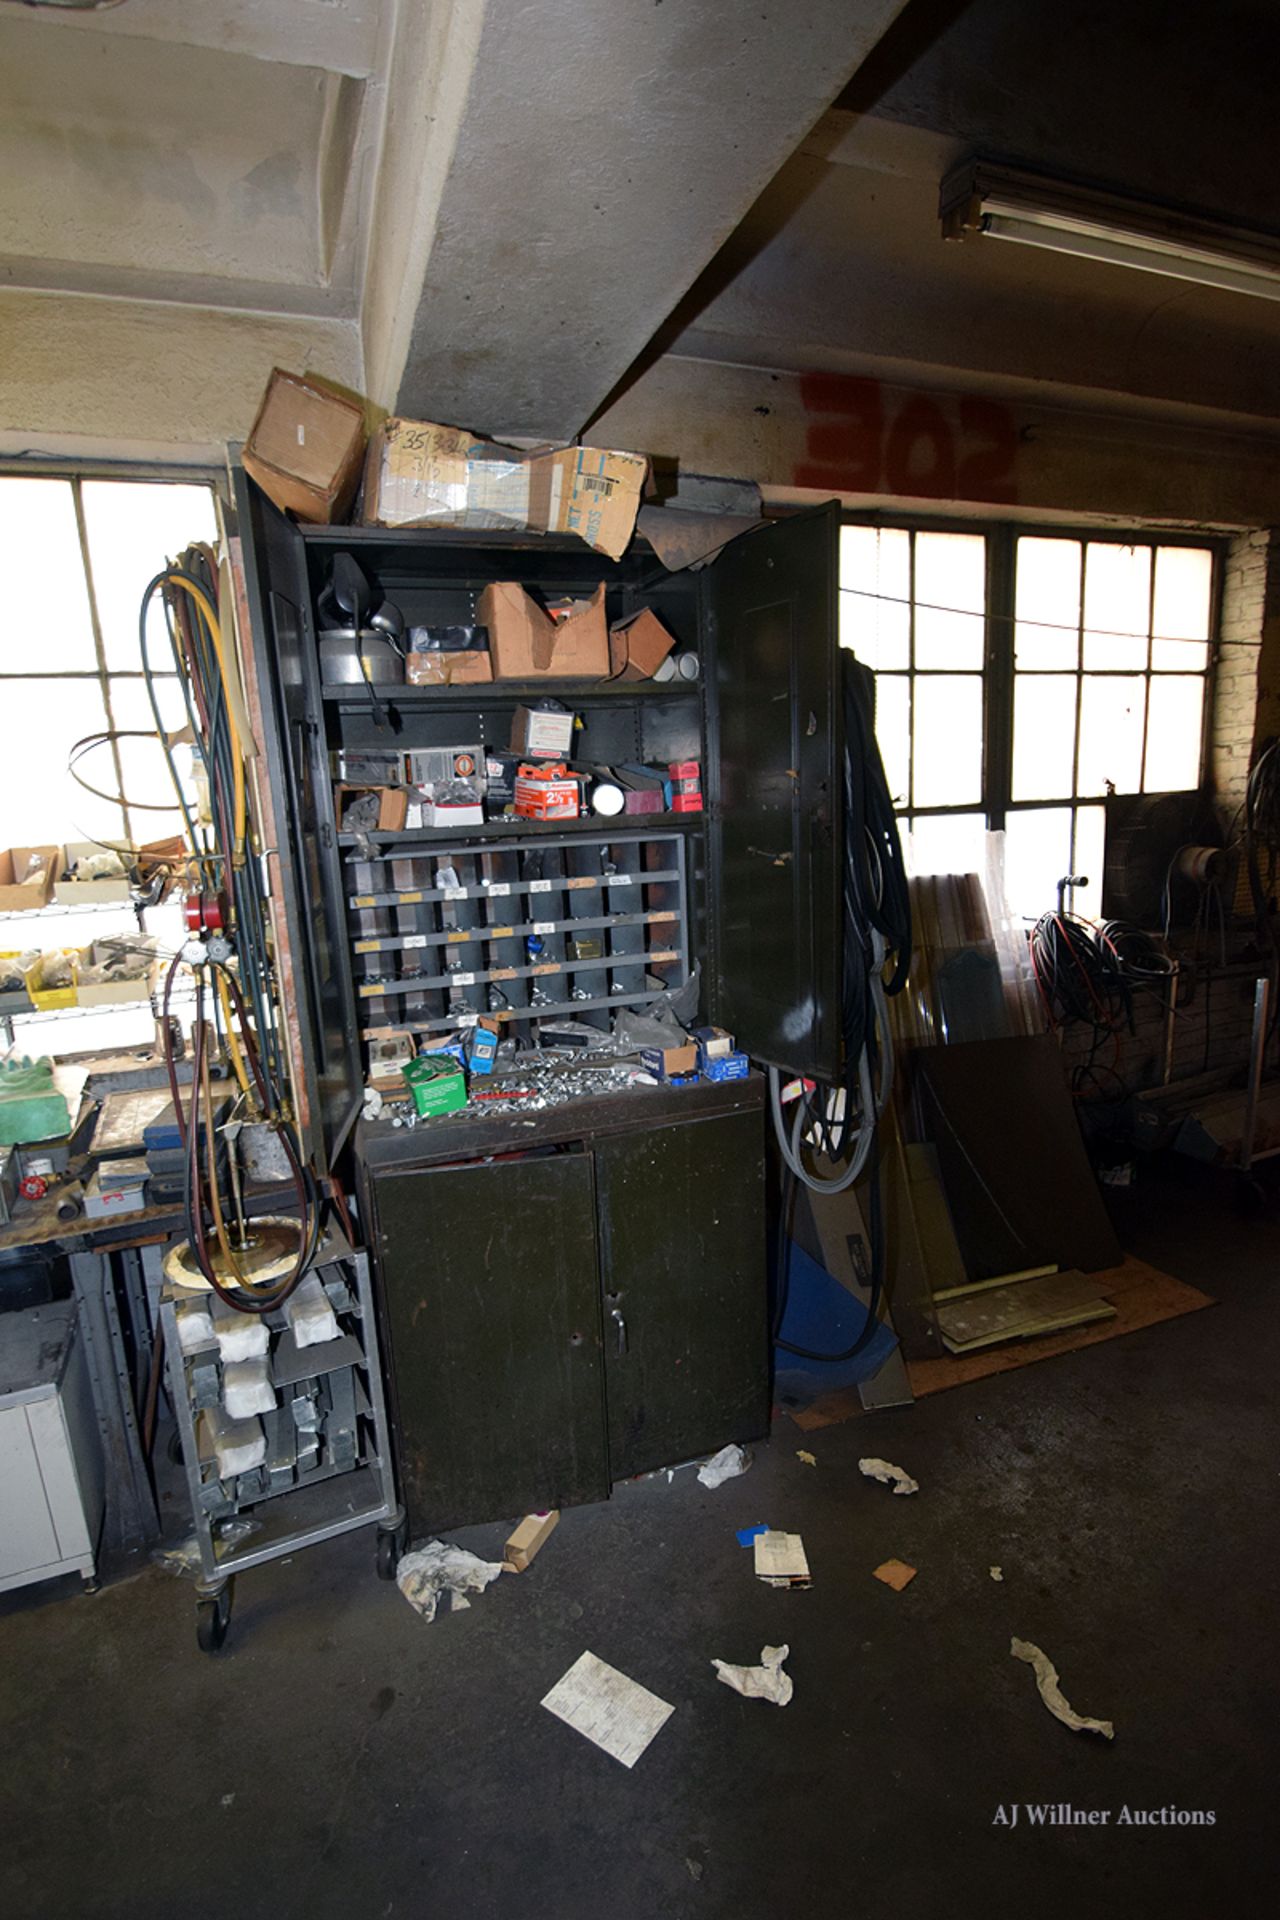 Contents of Workshop; Tools, Vacuums, Parts, Etc. - Image 4 of 13